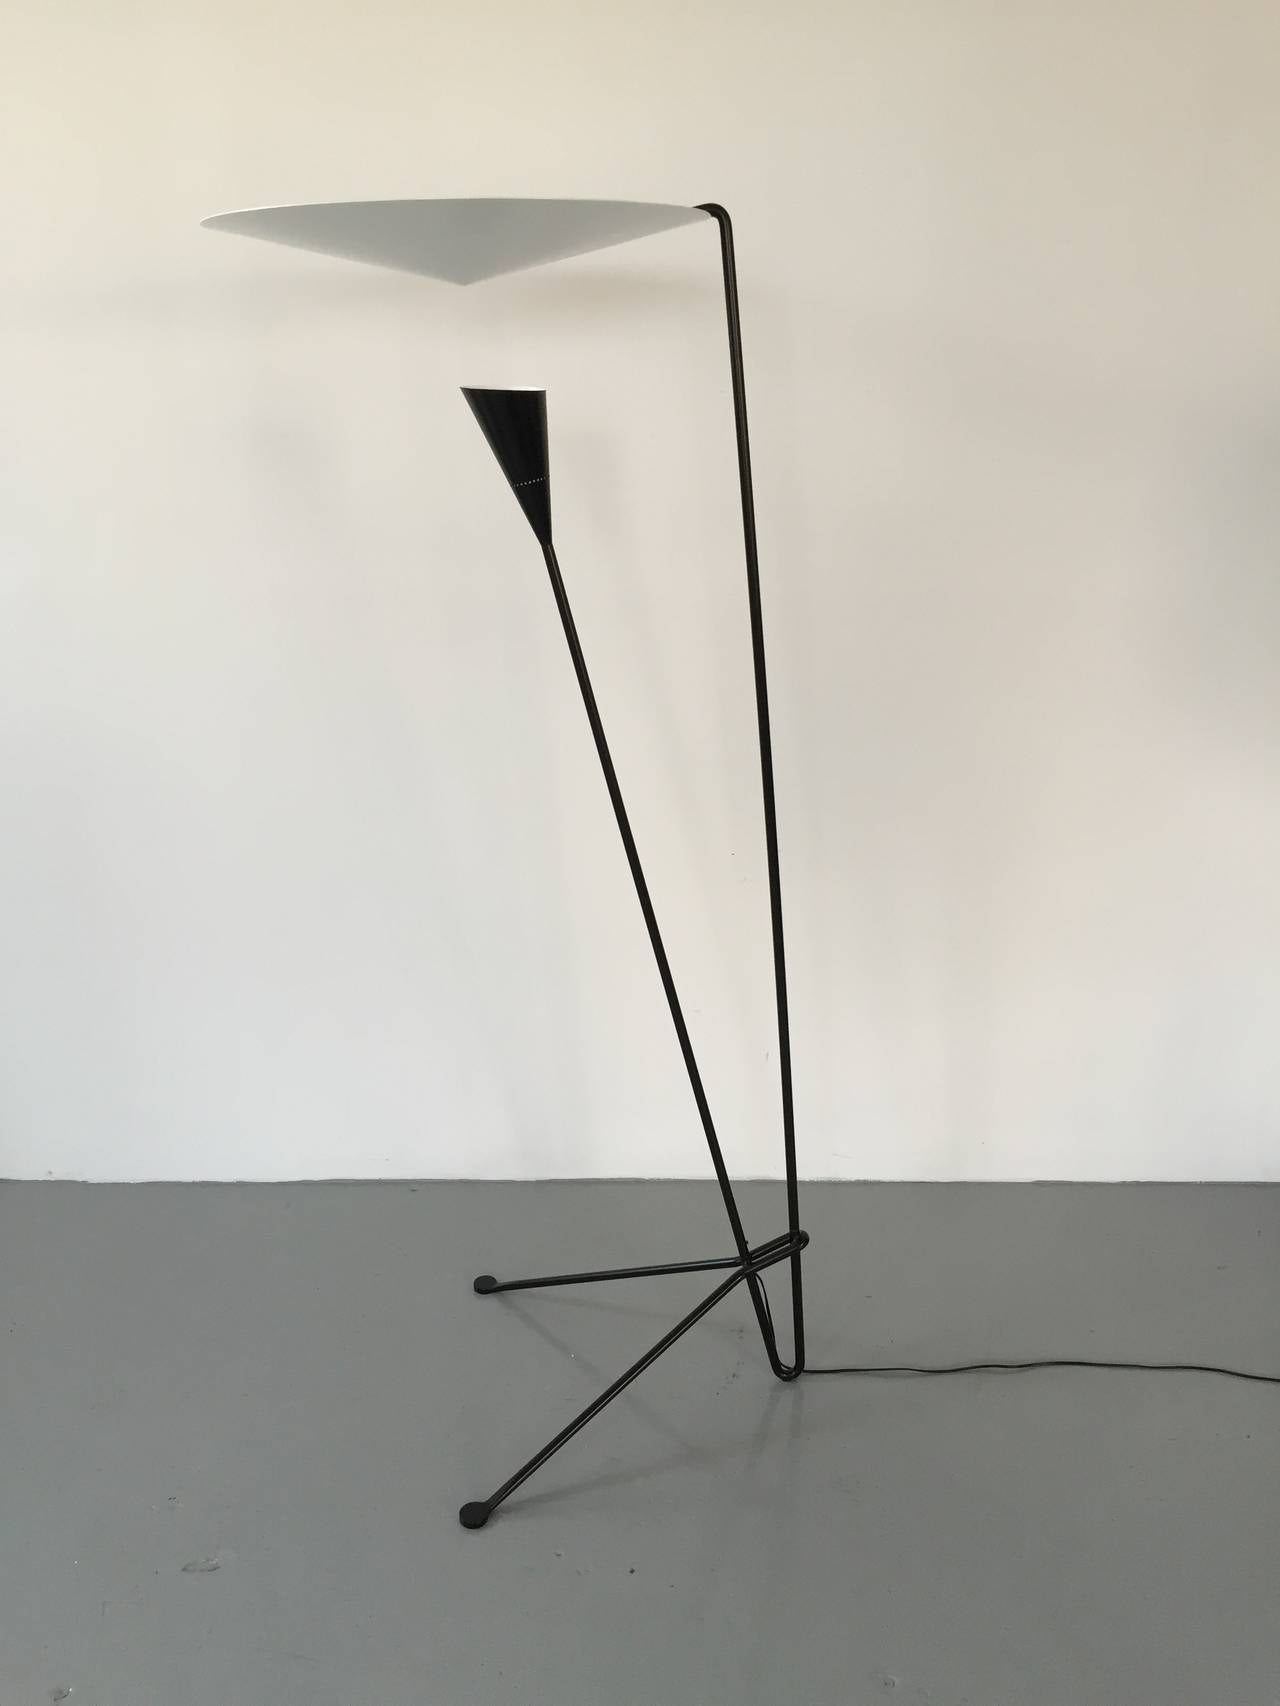 Dynamic lines and an innovative means by which the light is dispersed are signatures of this Michel Buffet lamp. Light shines on the conical disc above from the shade below and is reflected out.

This lamp comes is black and white.

 